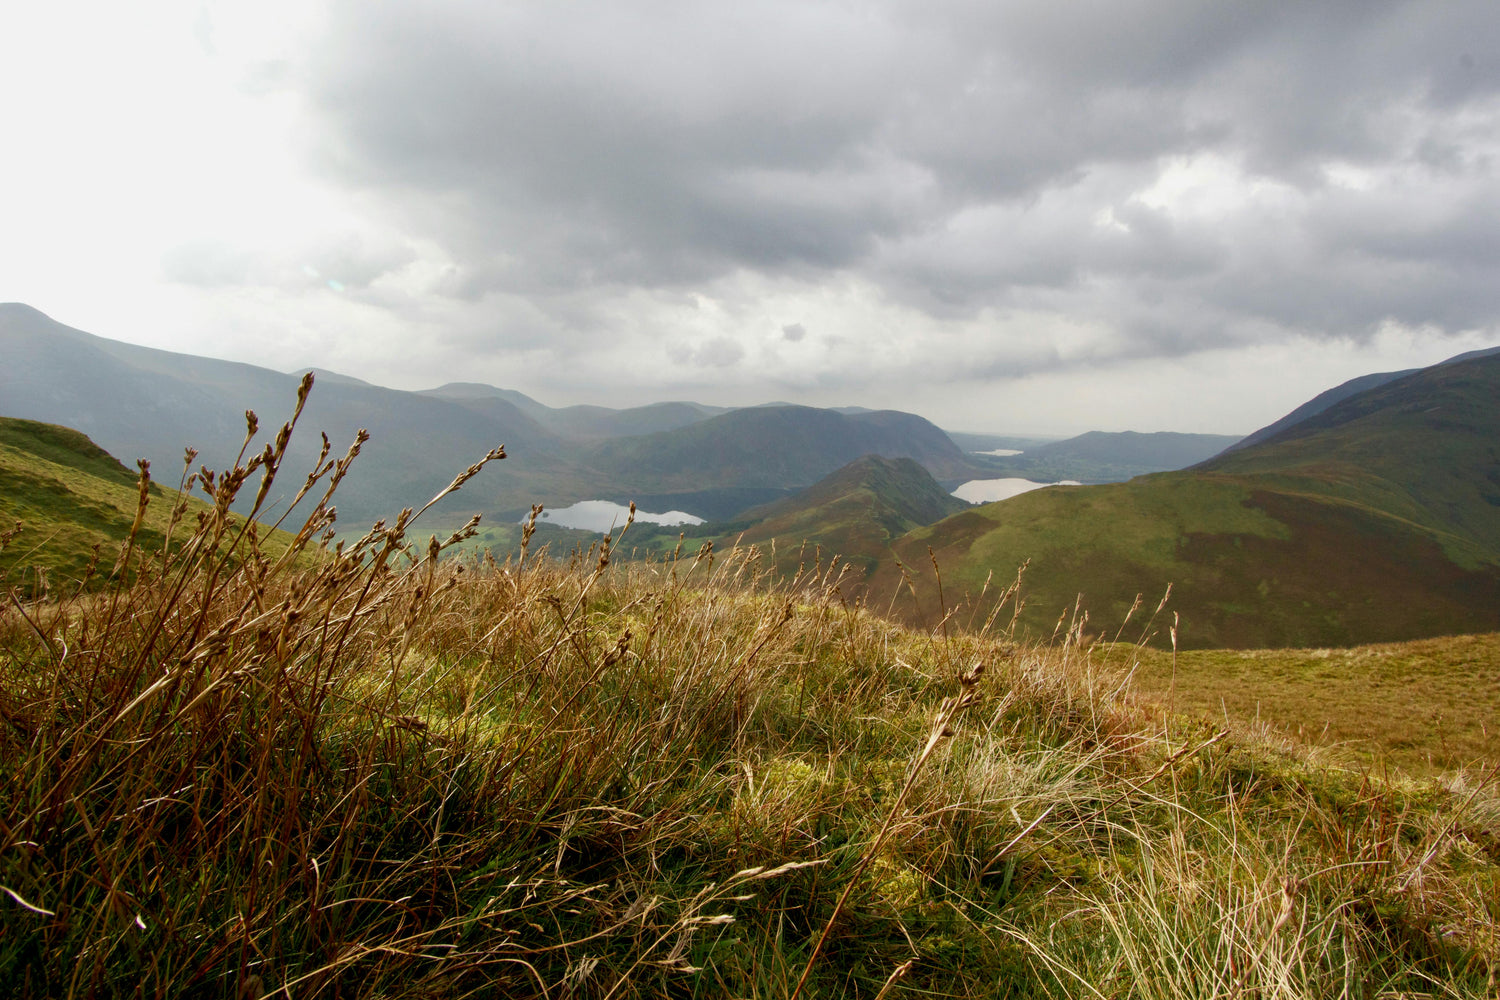 Stock photo of the Lake District - Photo by Yohantha Gunawarna, used with permission from www.pexels.com